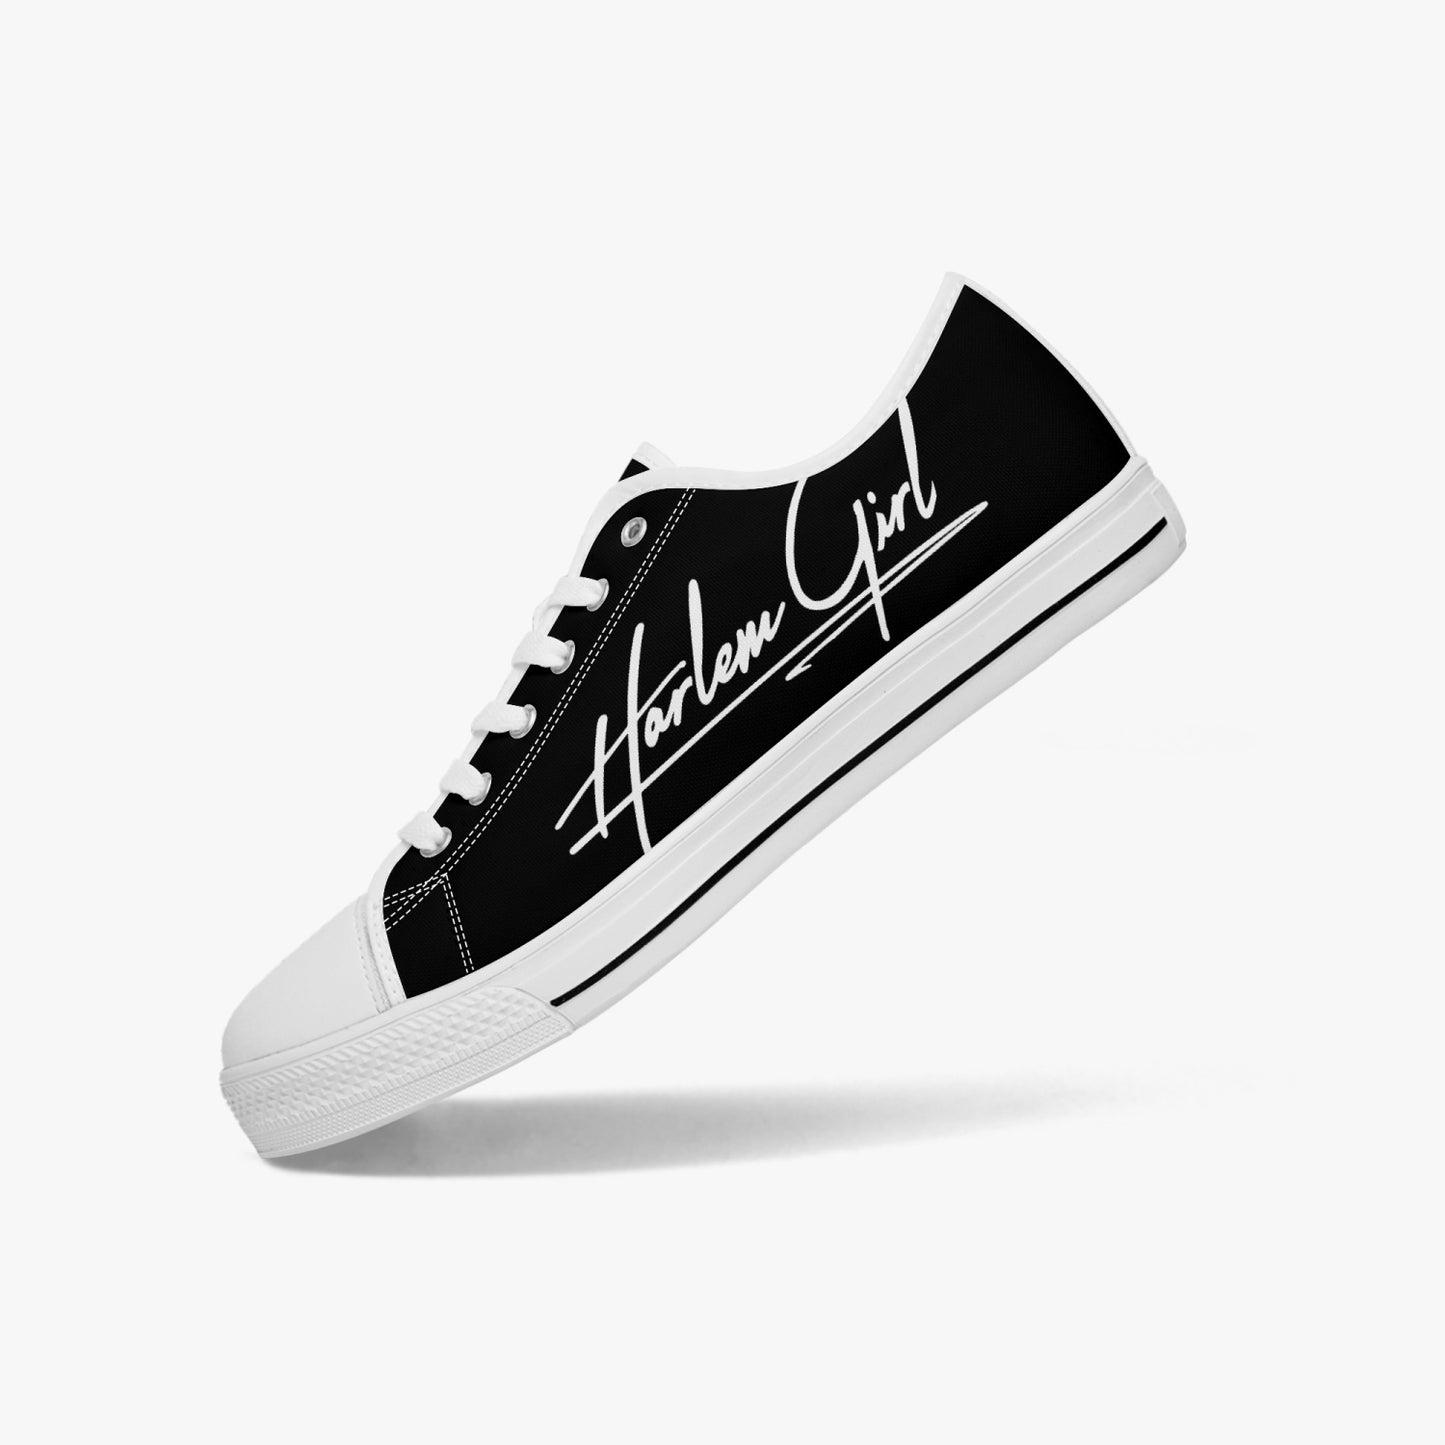 HB Harlem Girl "Lenox Ave" Classic Low Tops - Onyx - Women (Black or White Sole)